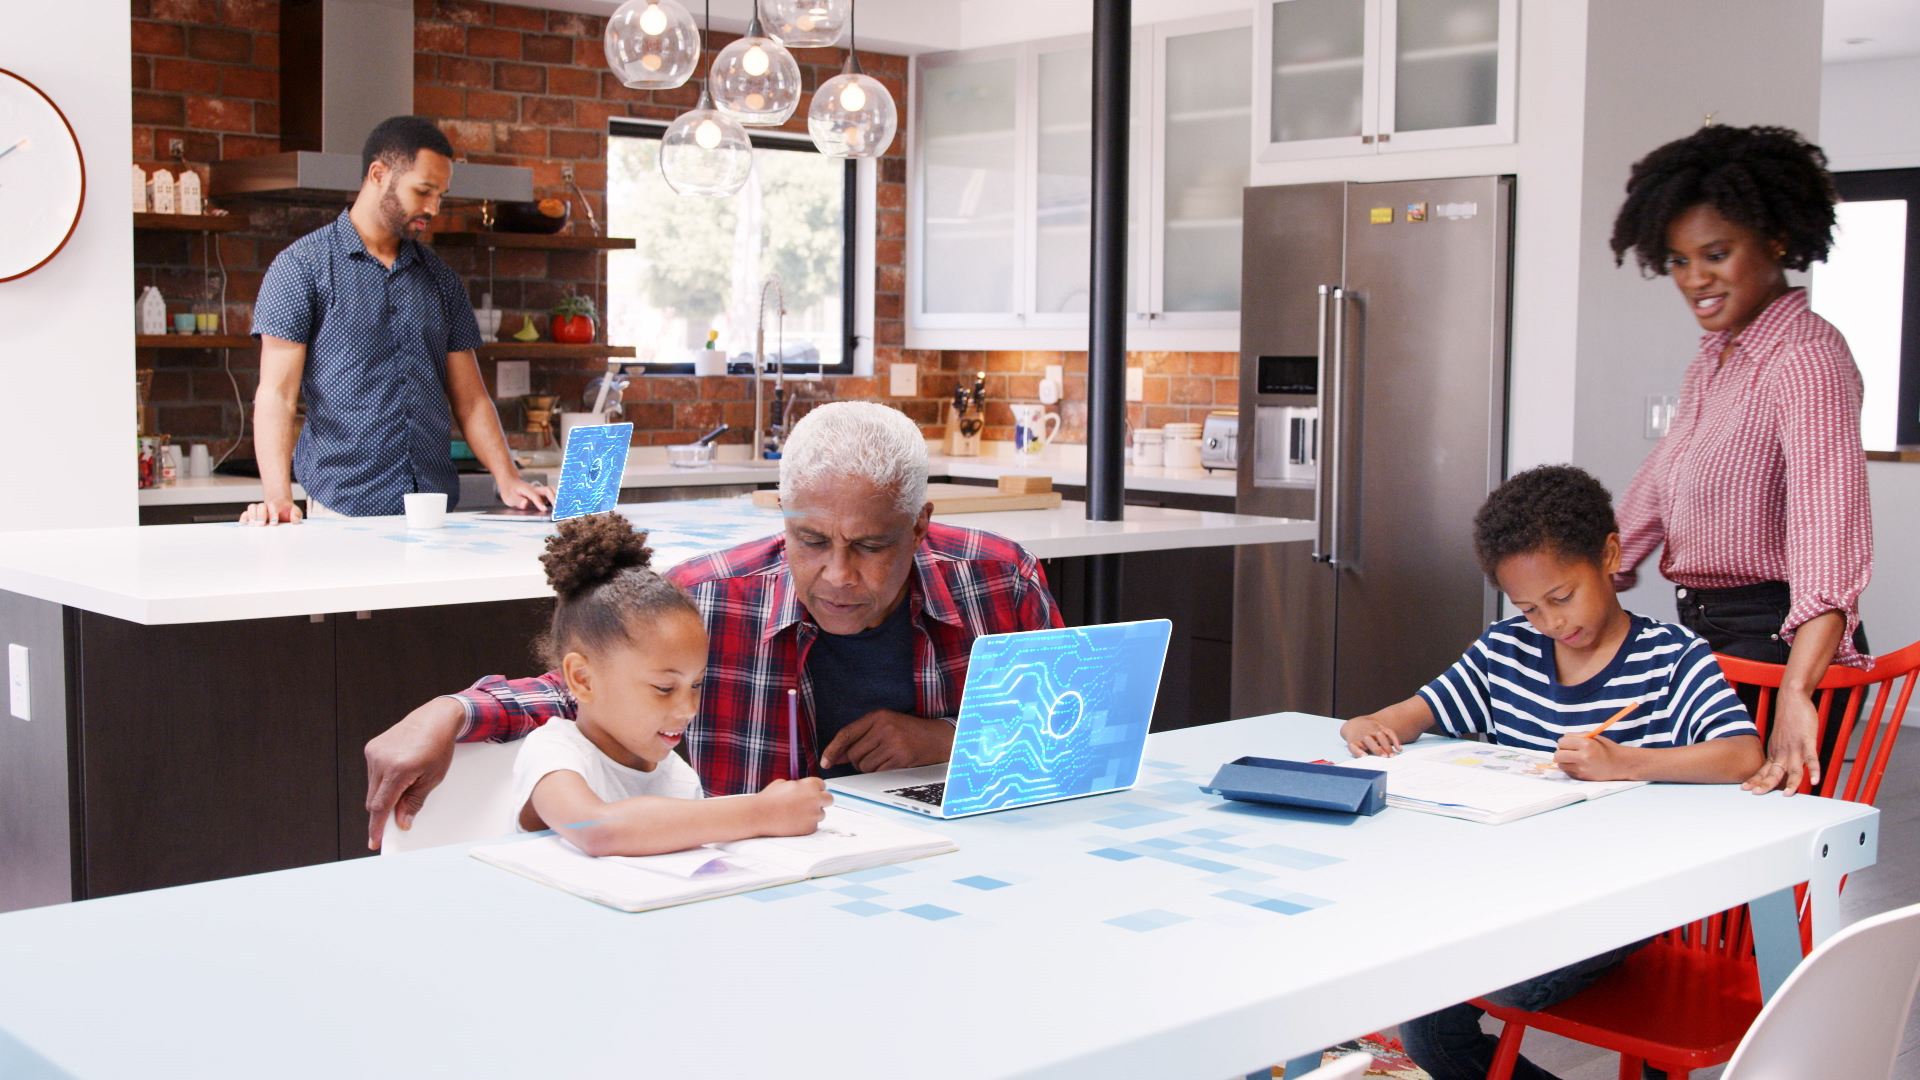 Tech elements illuminating laptops while family is in the kitchen